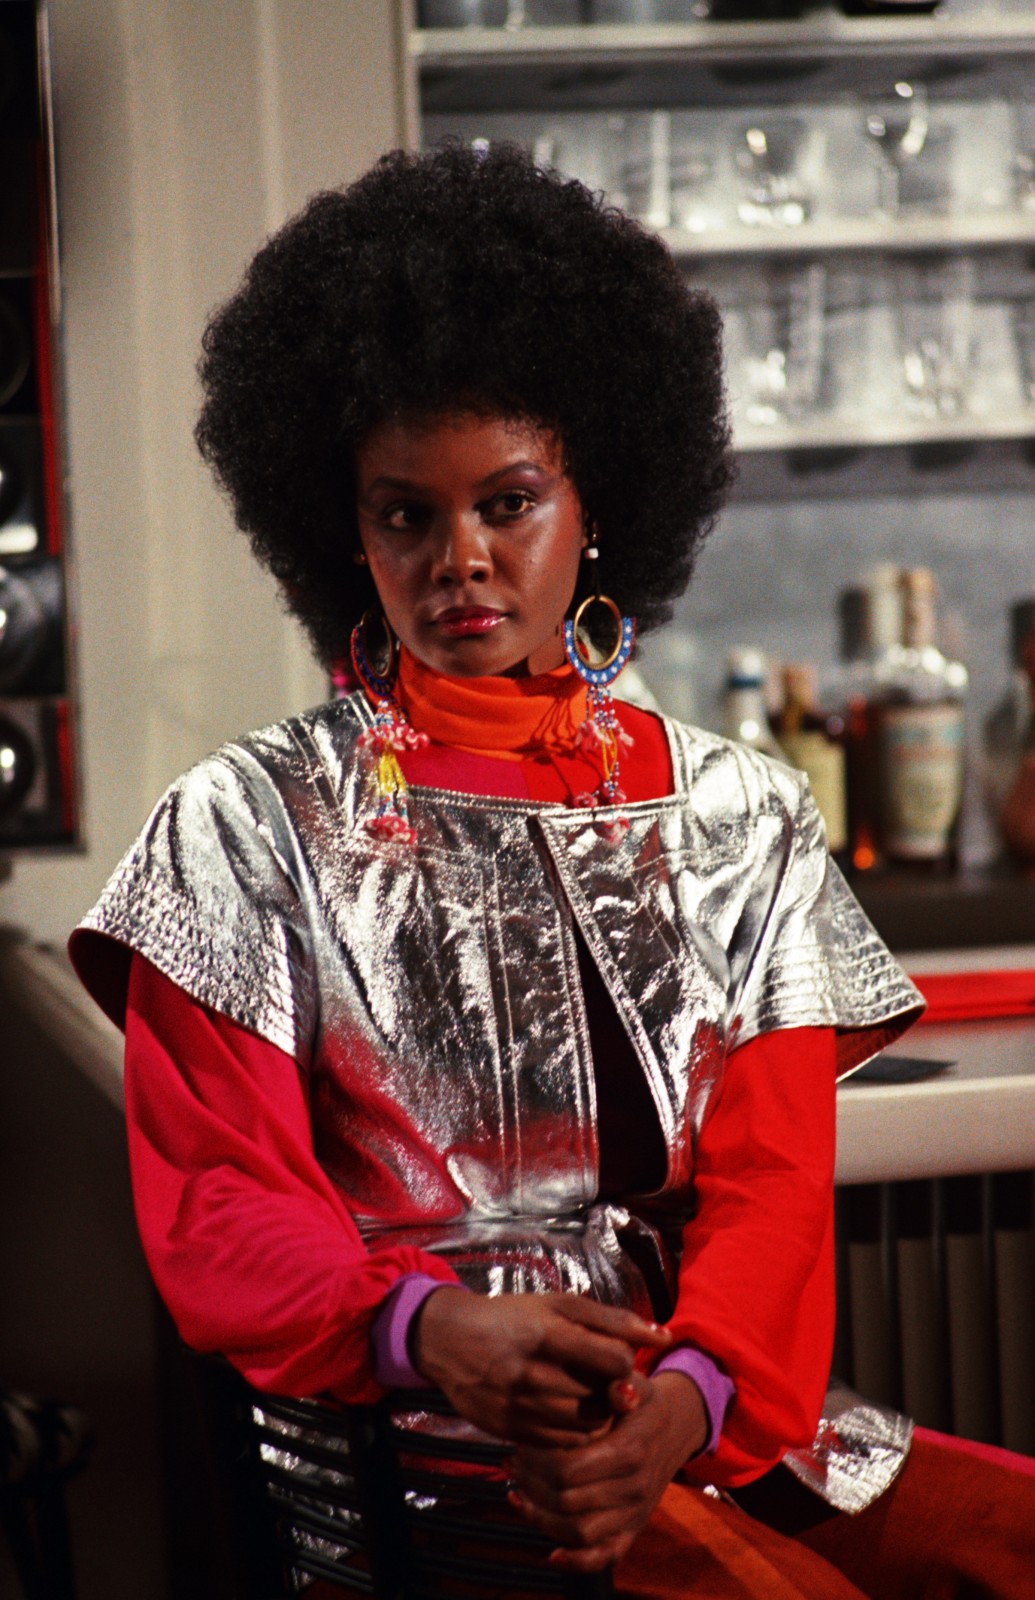 Tyranny Part #43 - Cleopatra Jones and the Town Full of Racists